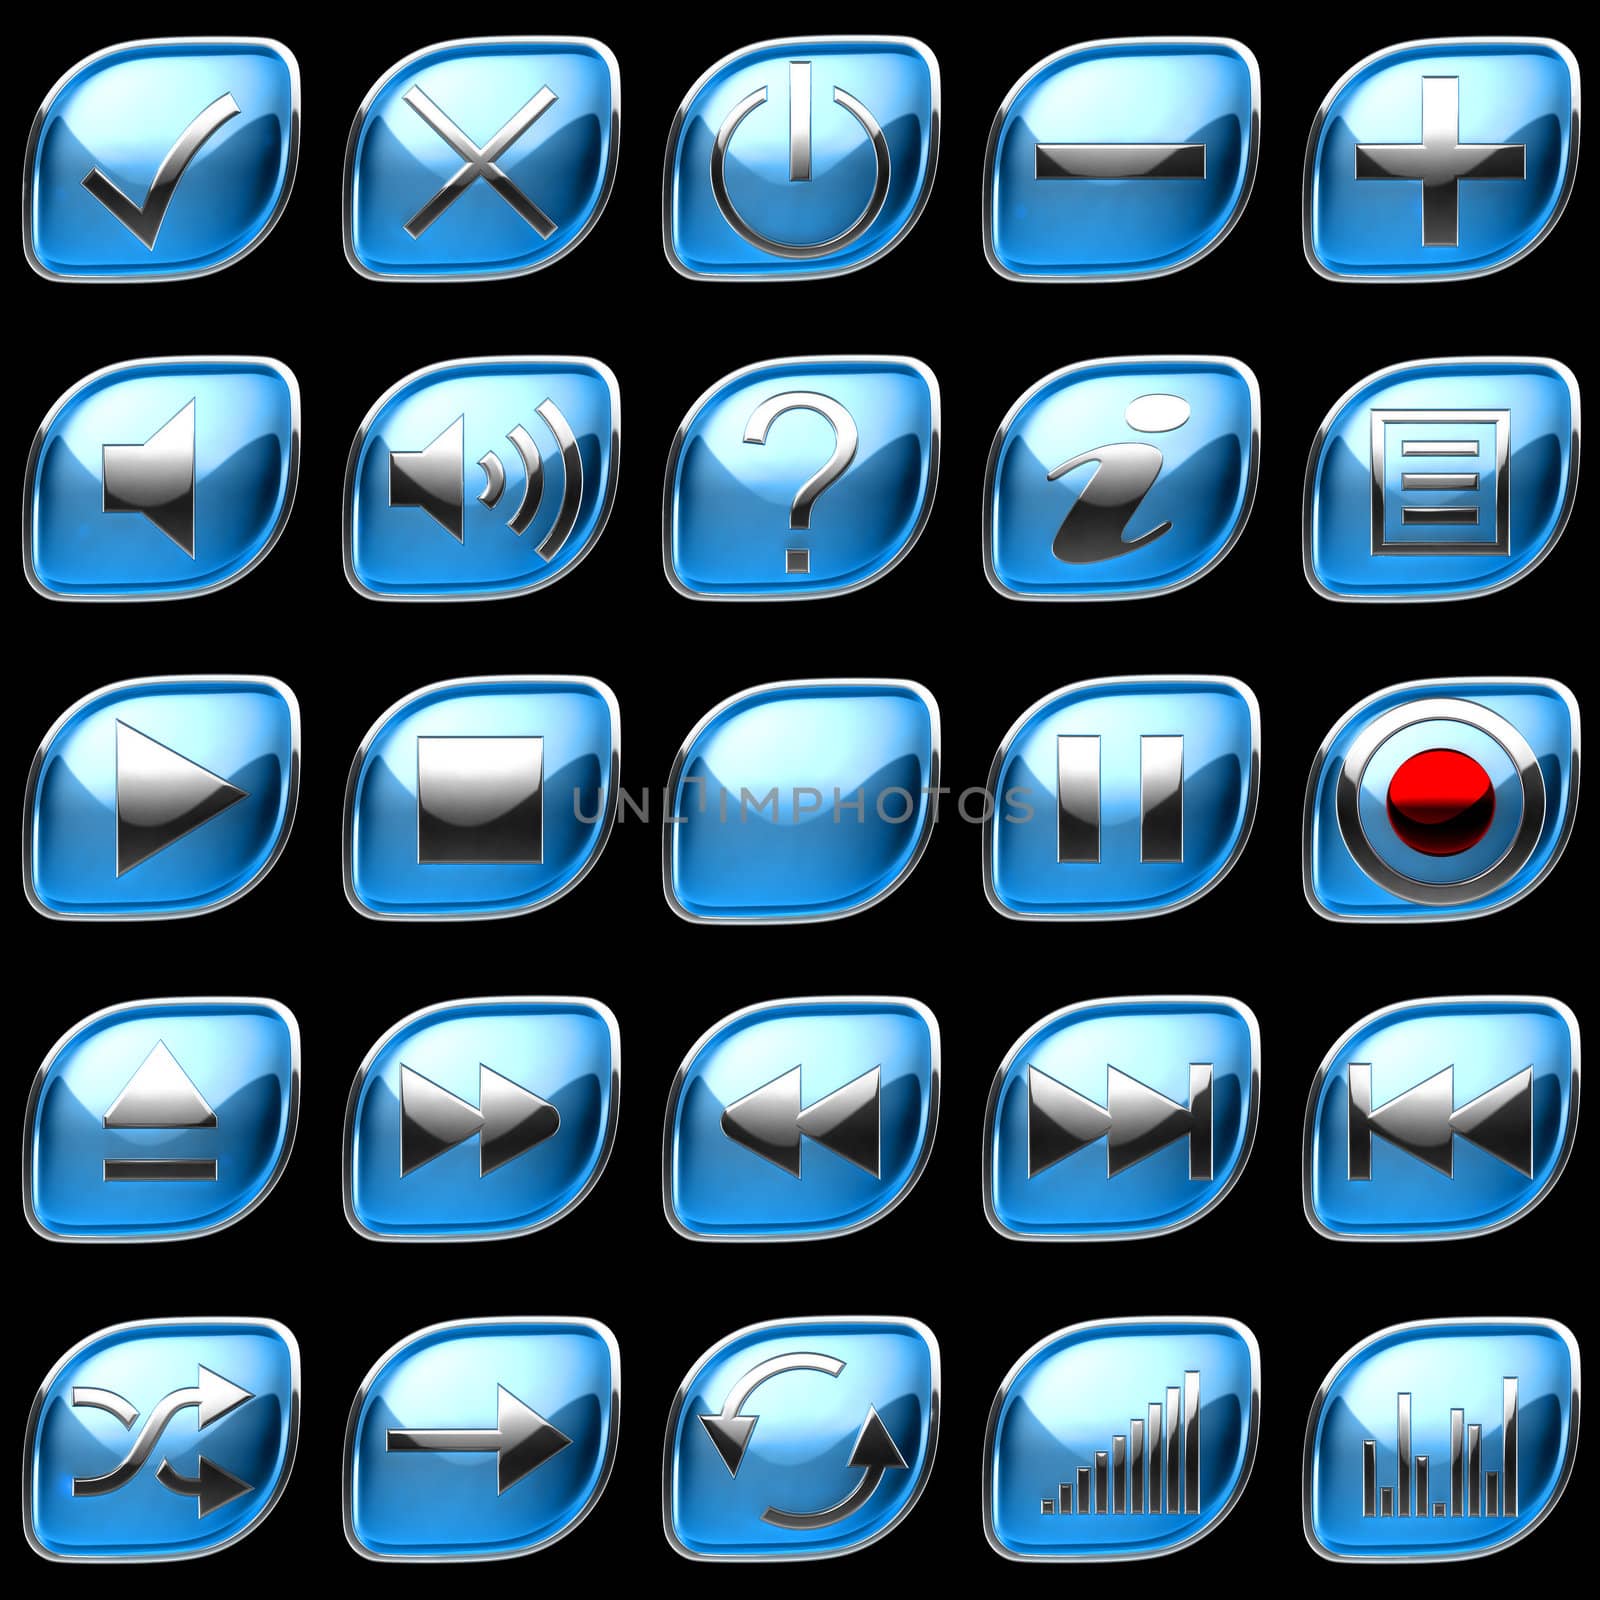 Blue Control panel icons or buttons isolated on black